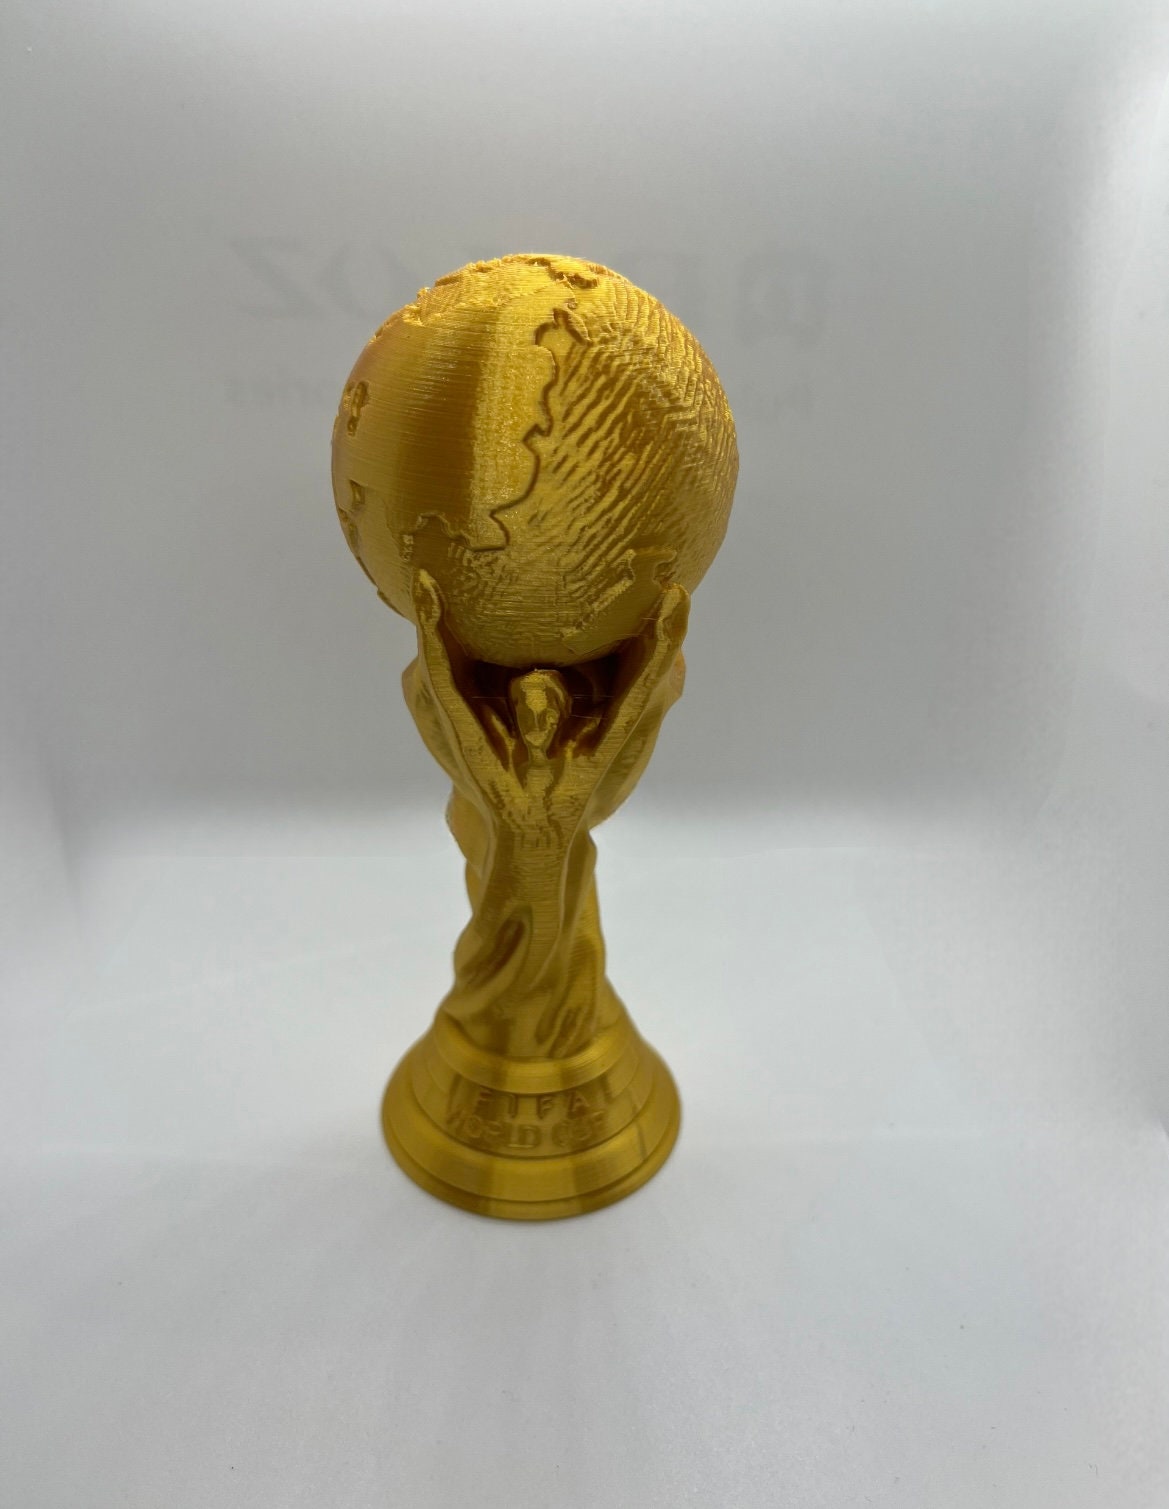 Golden World Cup Trophy Mini Metal Trophy 3 cm Height Size Gold Color  Heavy-soccerwe